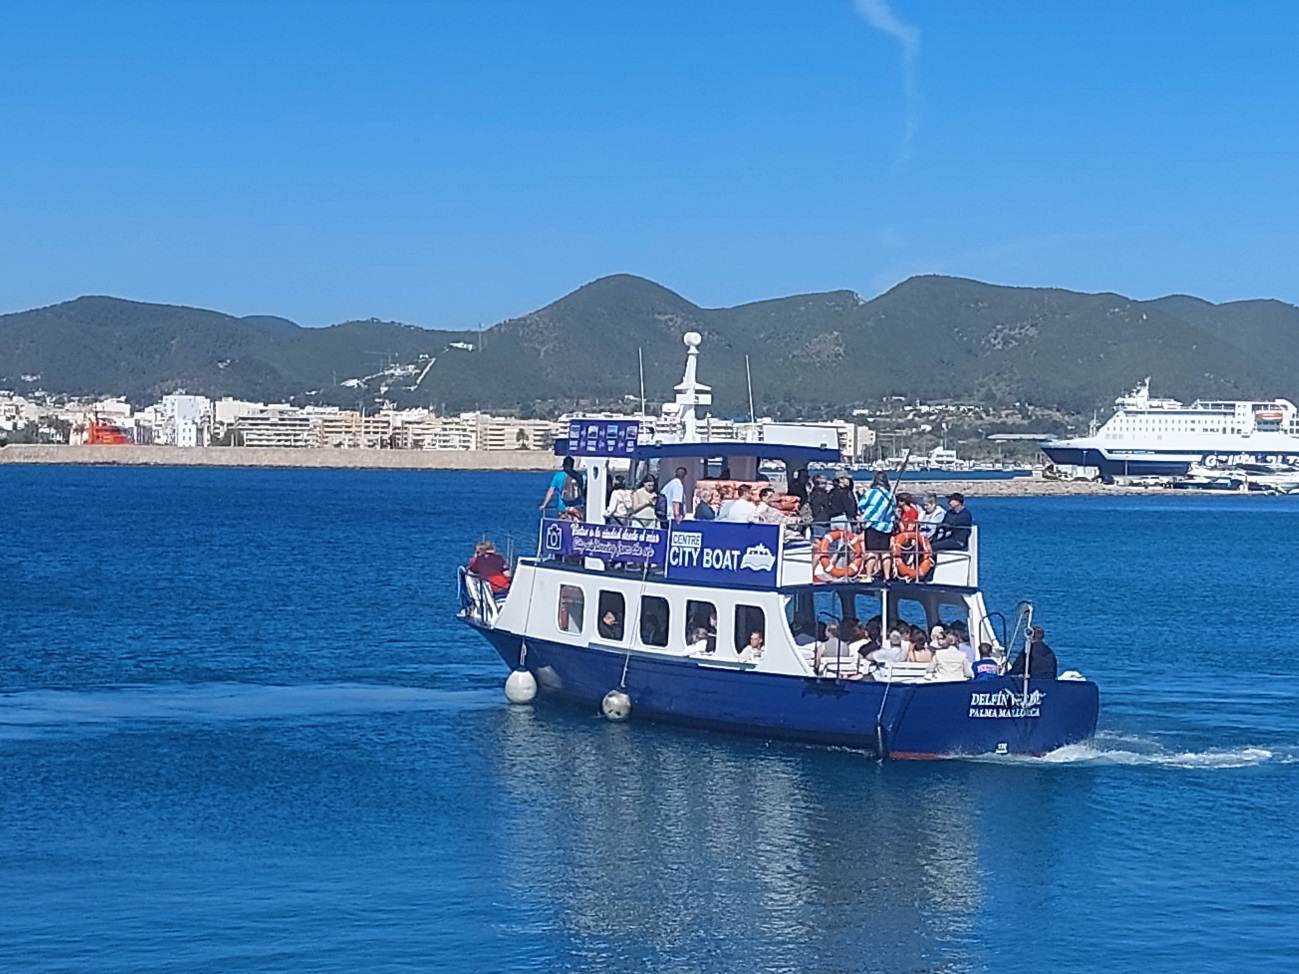 19,000 cruise passengers have been using the City Boat maritime transport service in the port of Eivissa during a period of three months